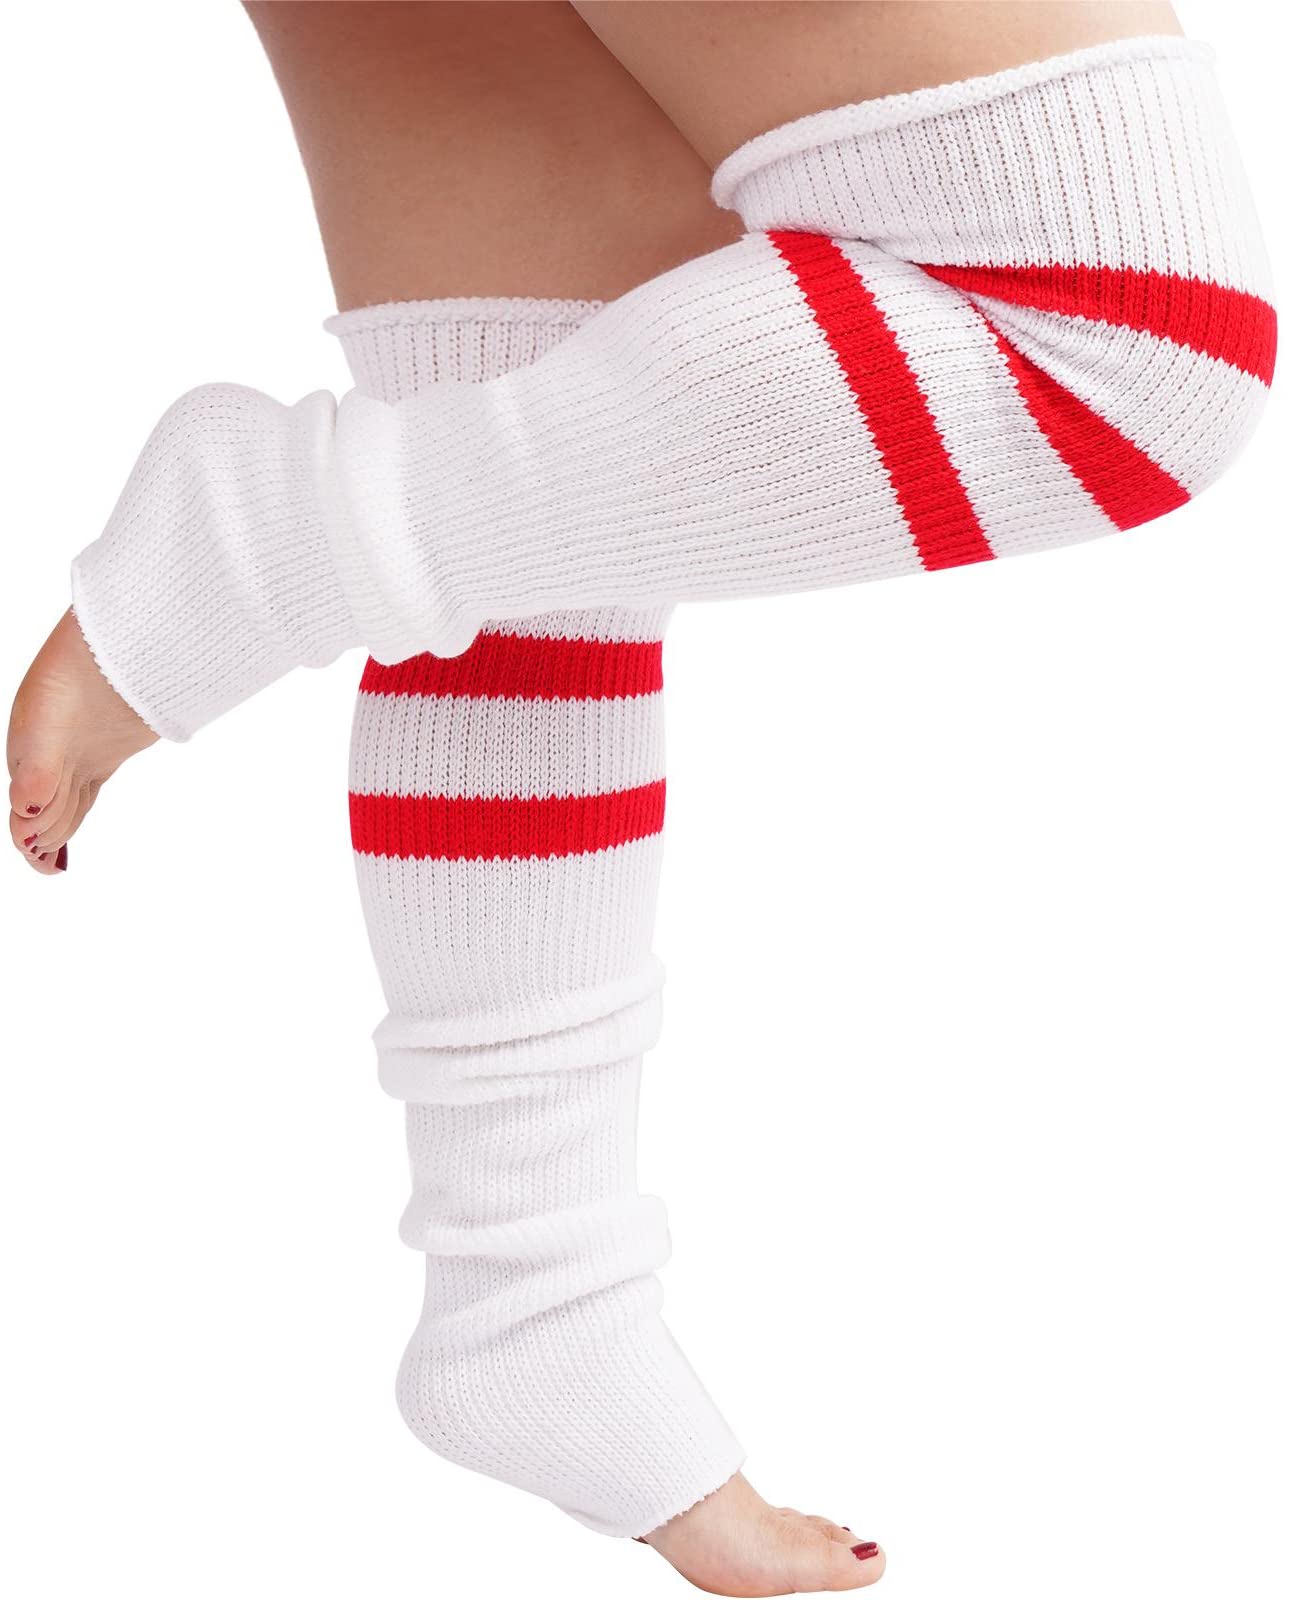 Plus Size Leg Warmers for Women-White & Red - Moon Wood